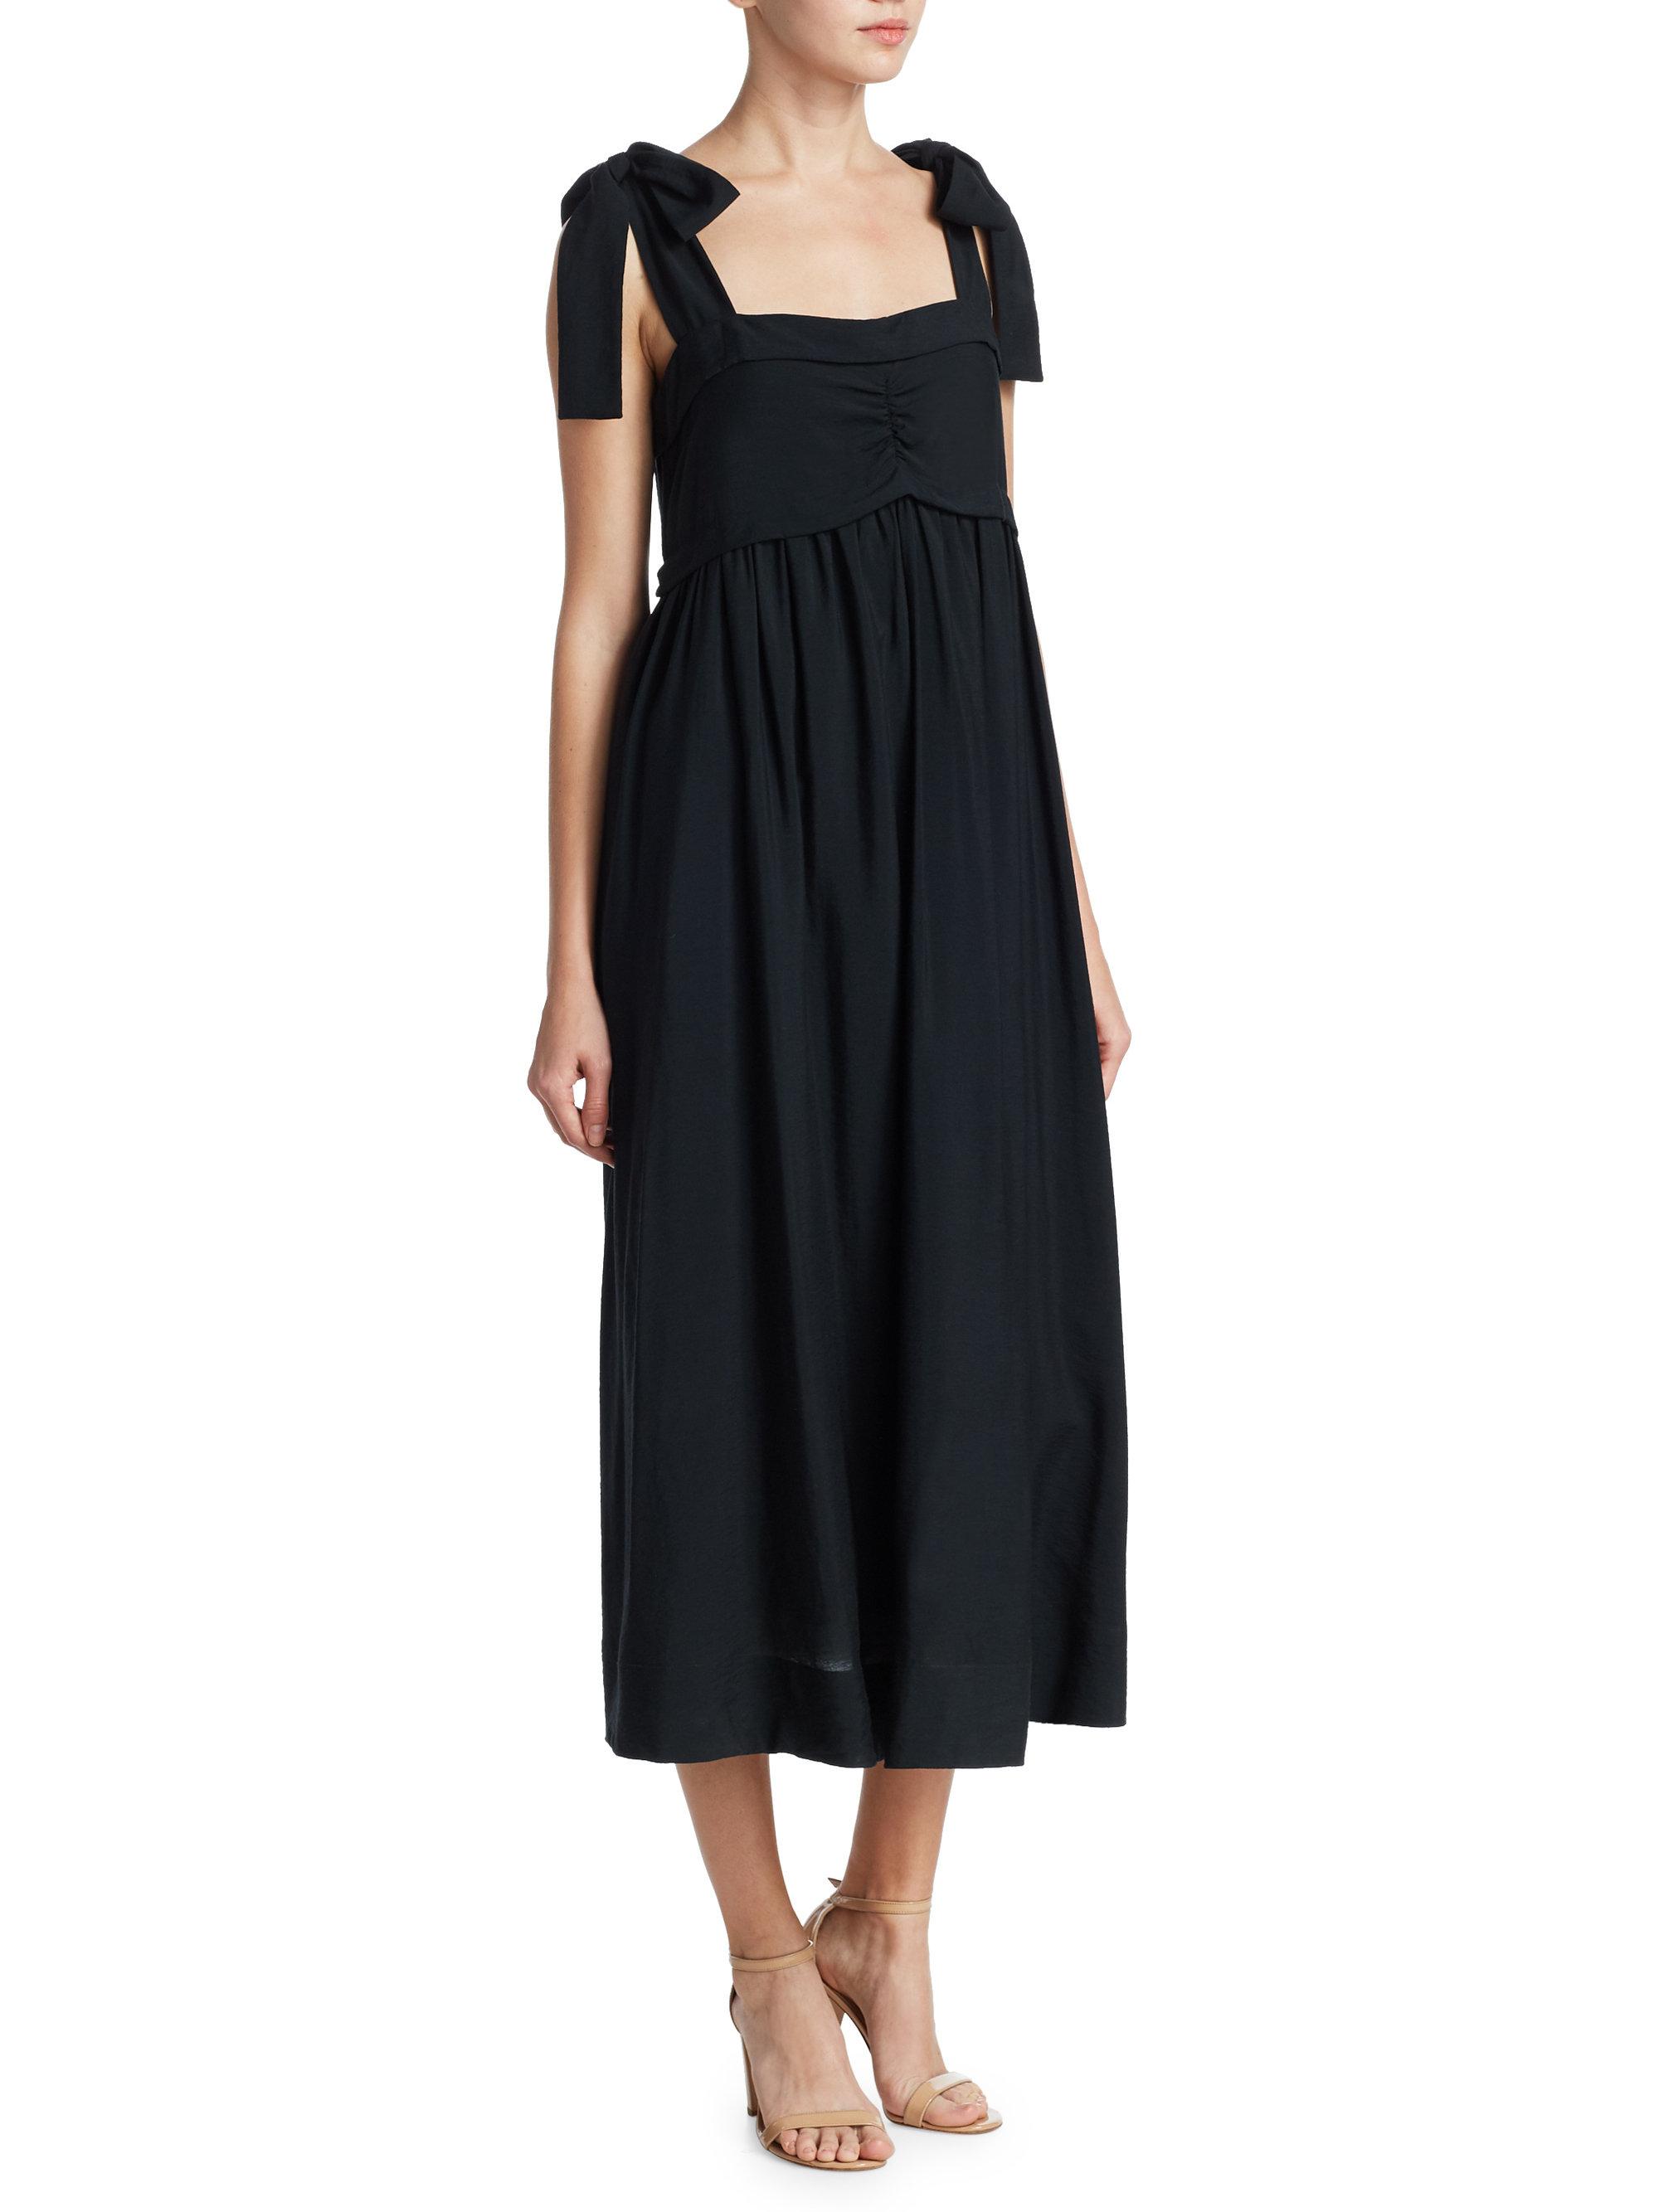 See By Chloé Tie Shoulder Maxi Dress in Black | Lyst